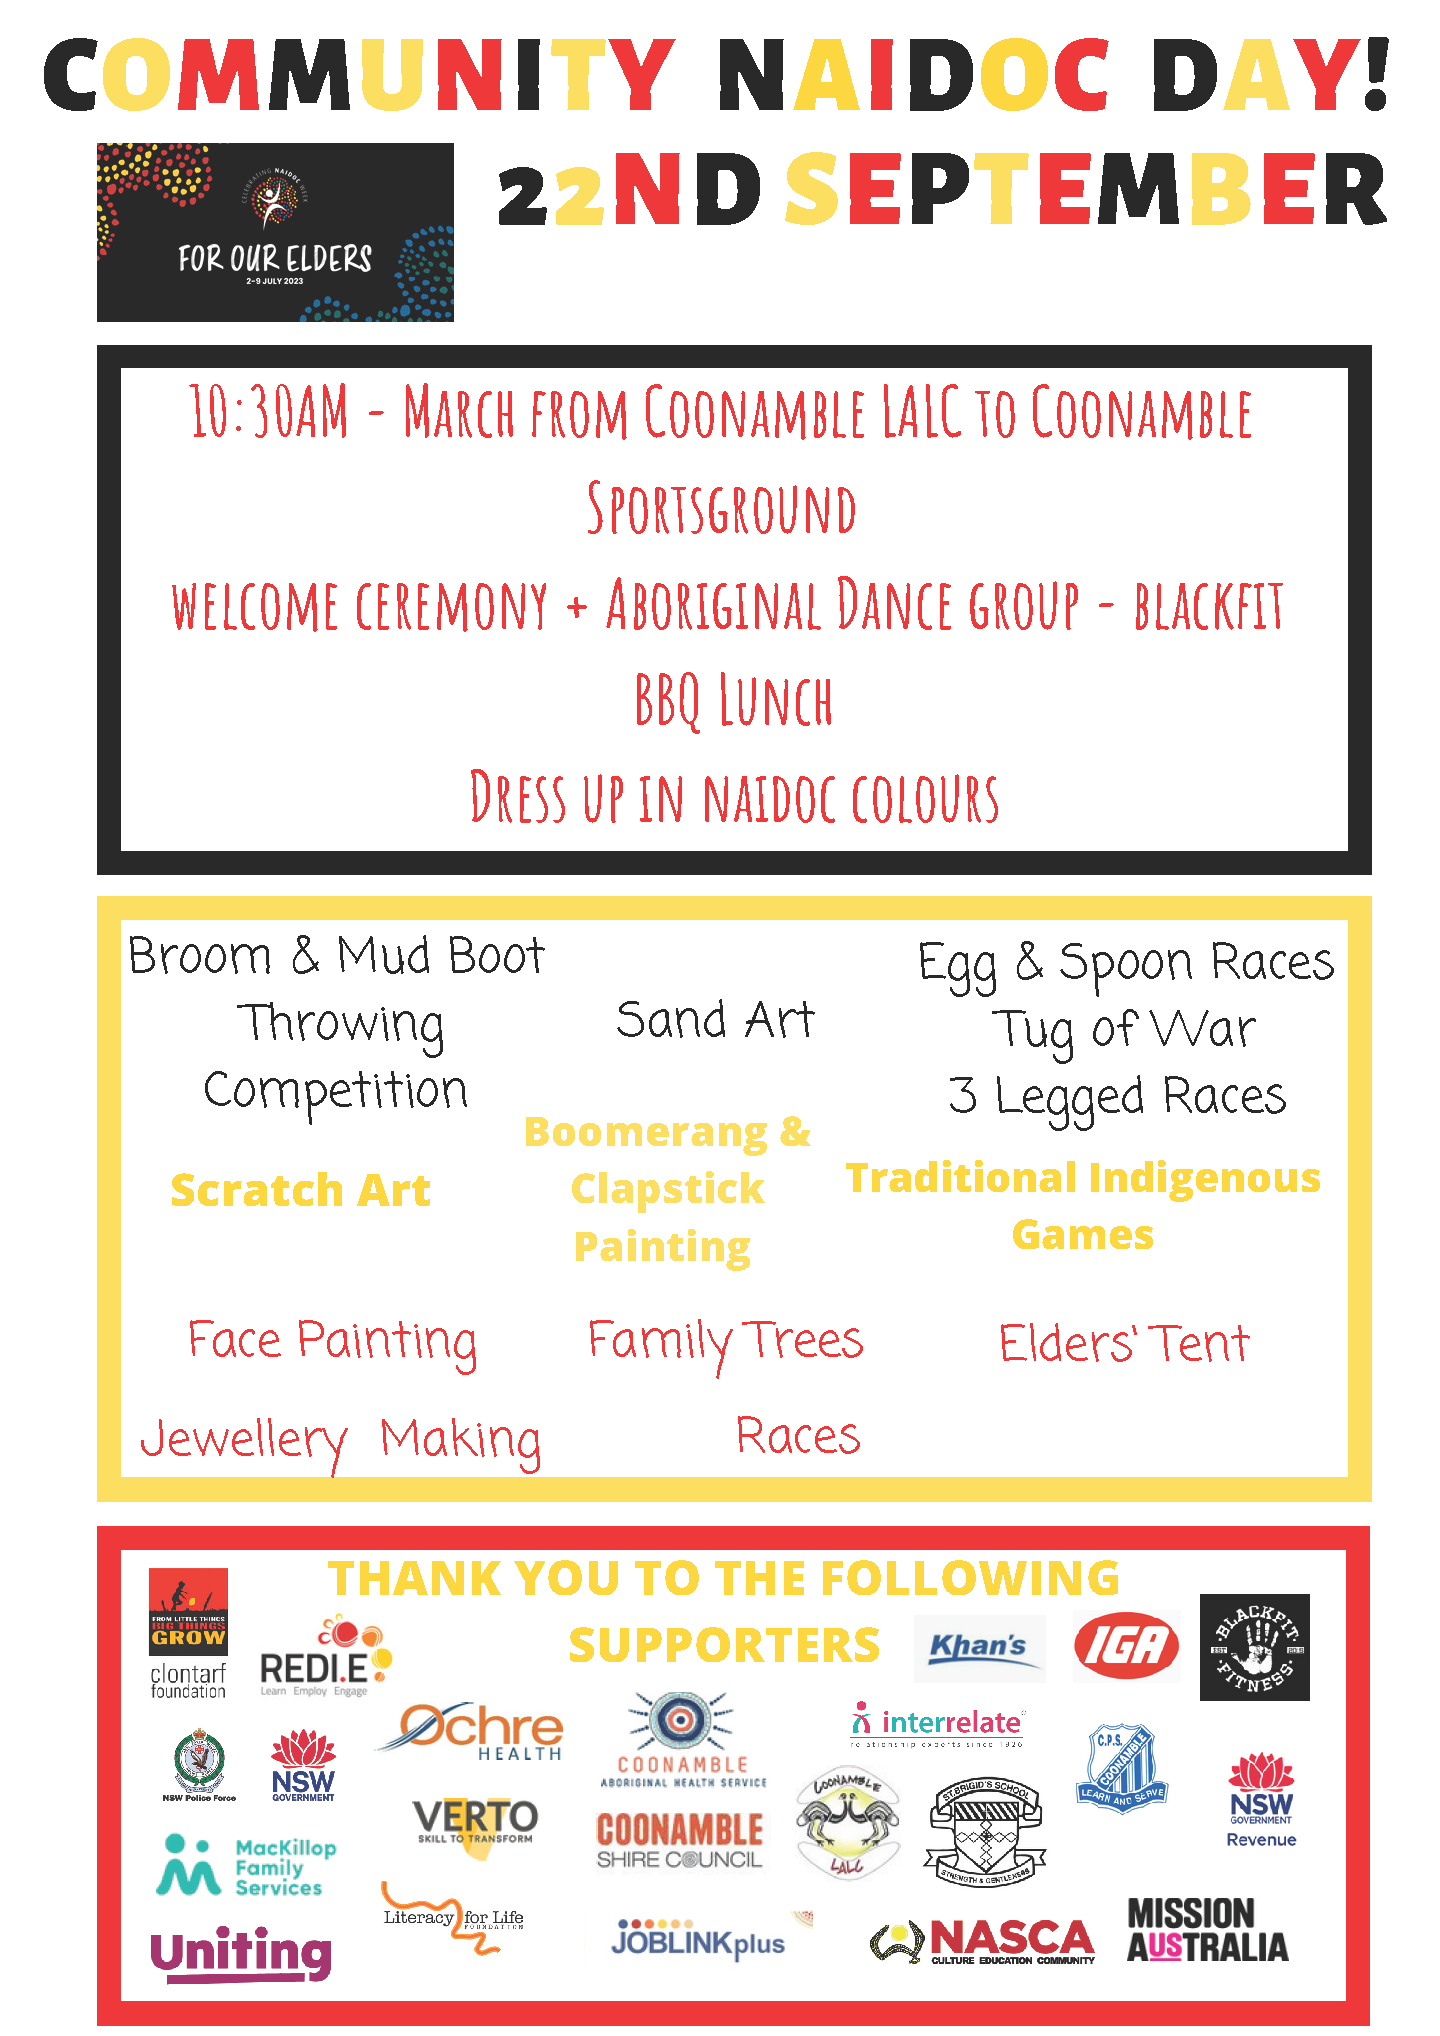 Join in the Coonamble NAIDOC Community Day fun!